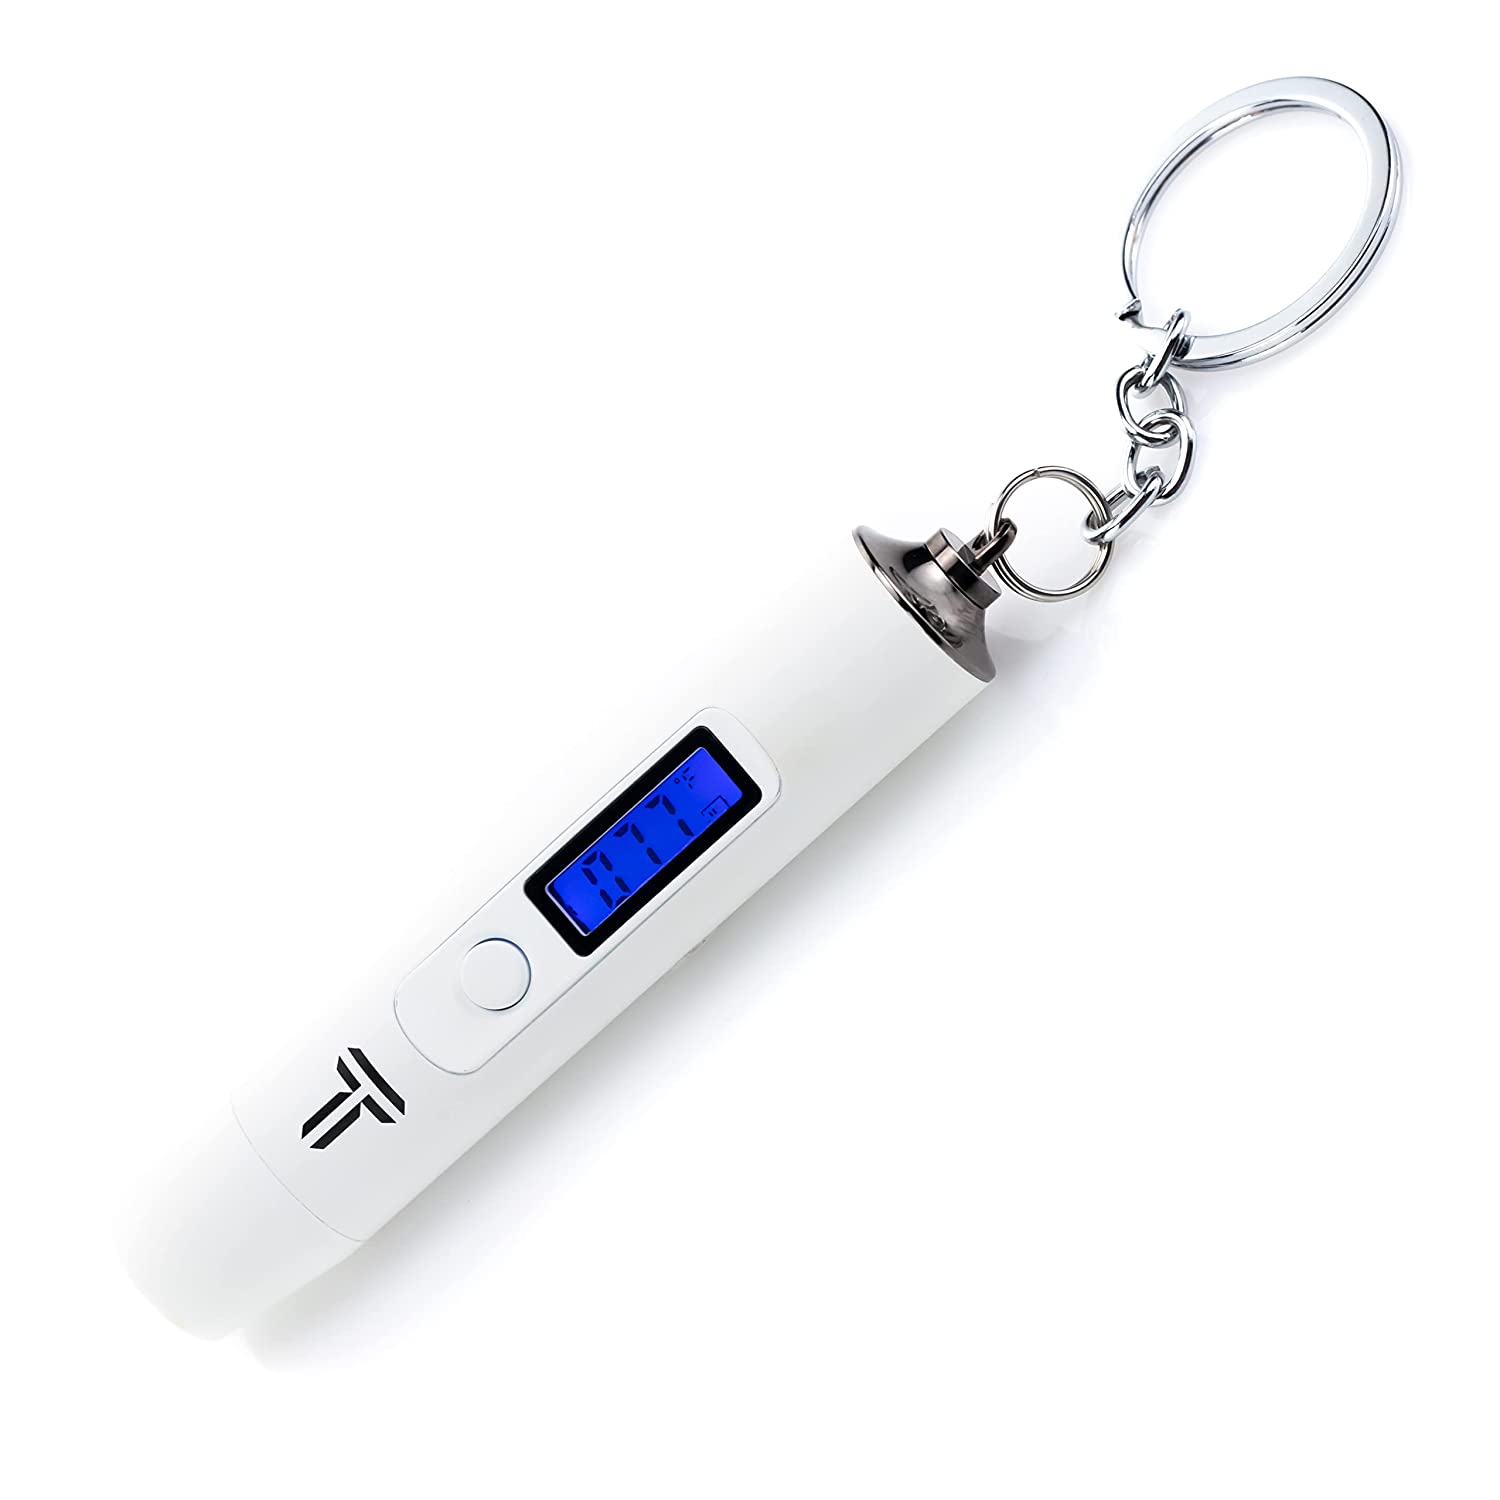 Terpometer 2.0 Dab Thermometer